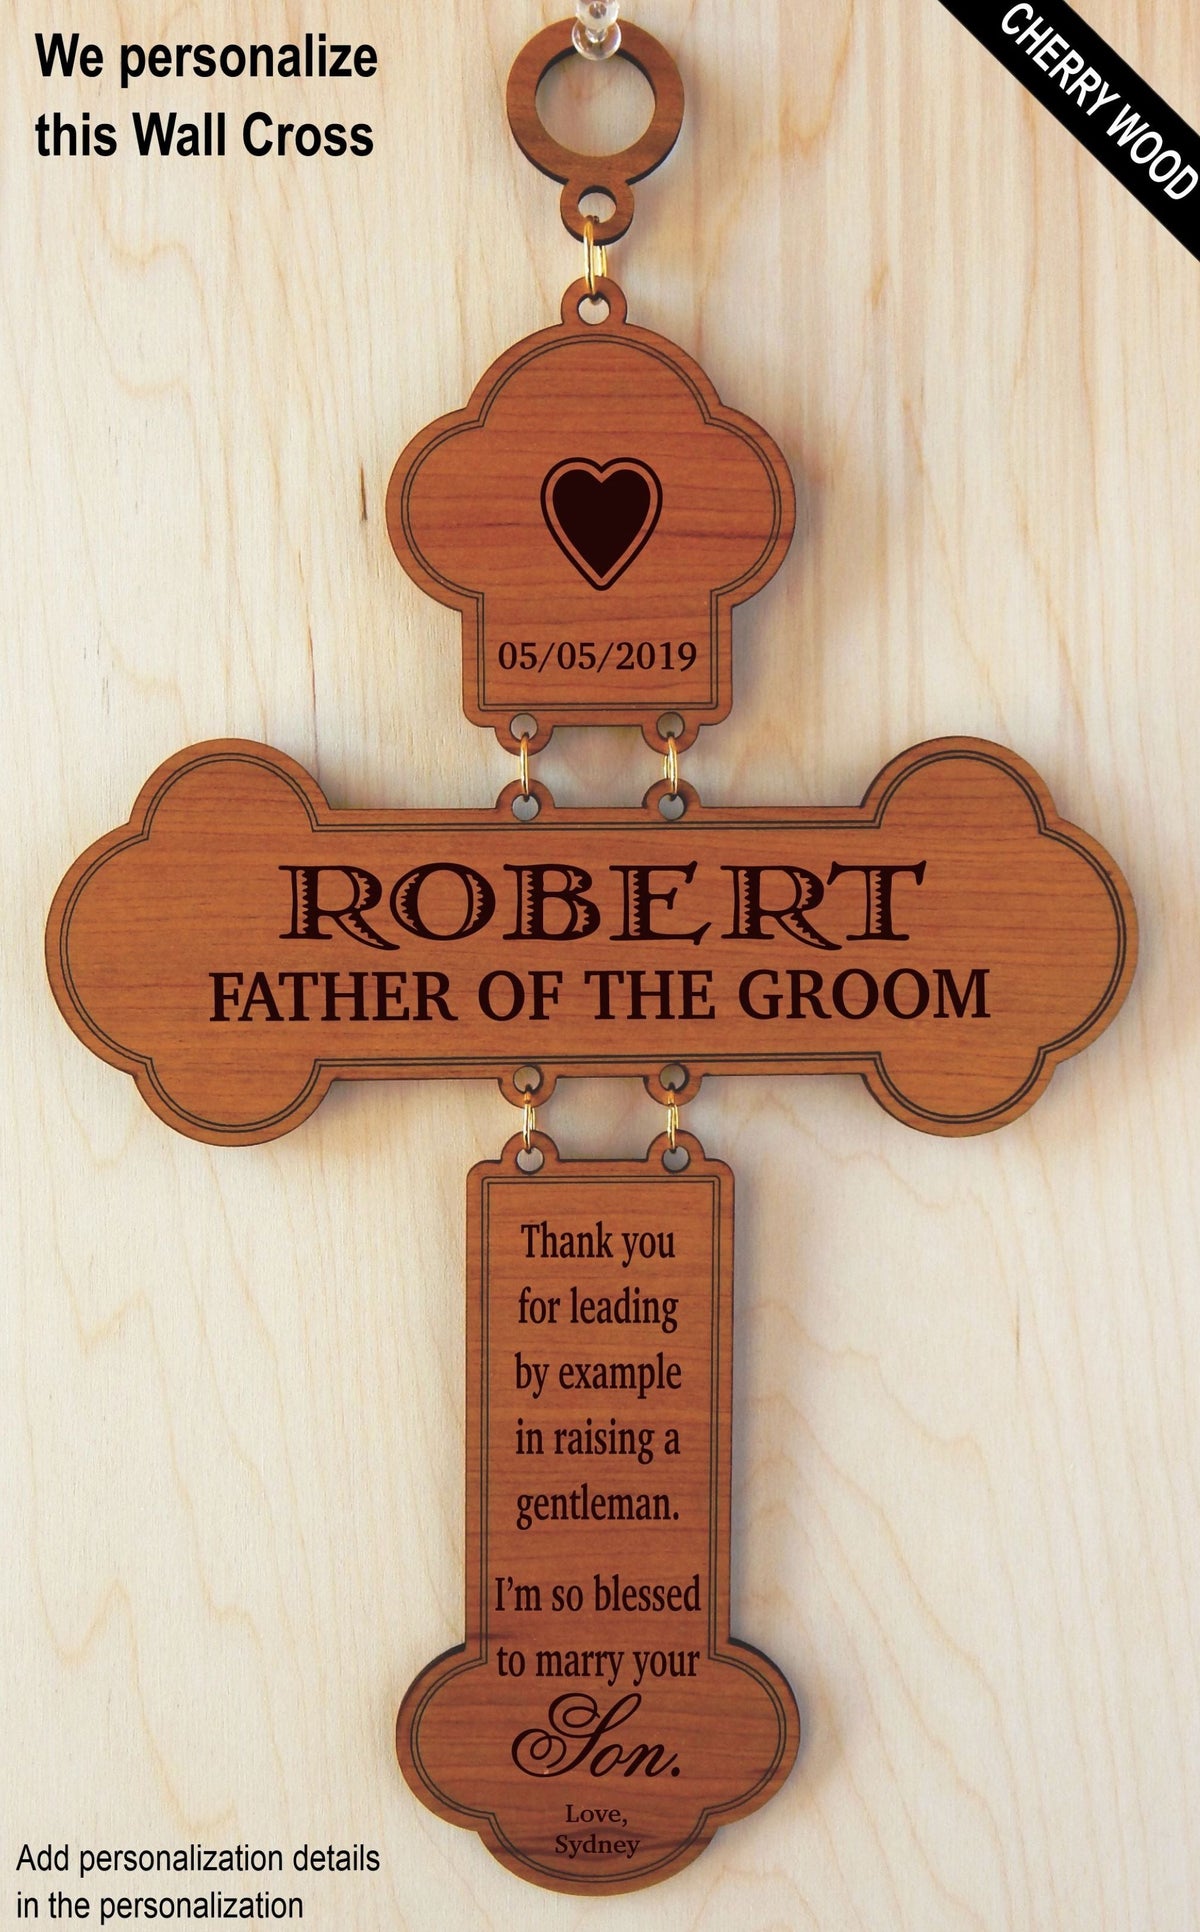 Father of the Groom Gift | Father in Law Wedding Gifts | Personalized Wall Cross DFG001